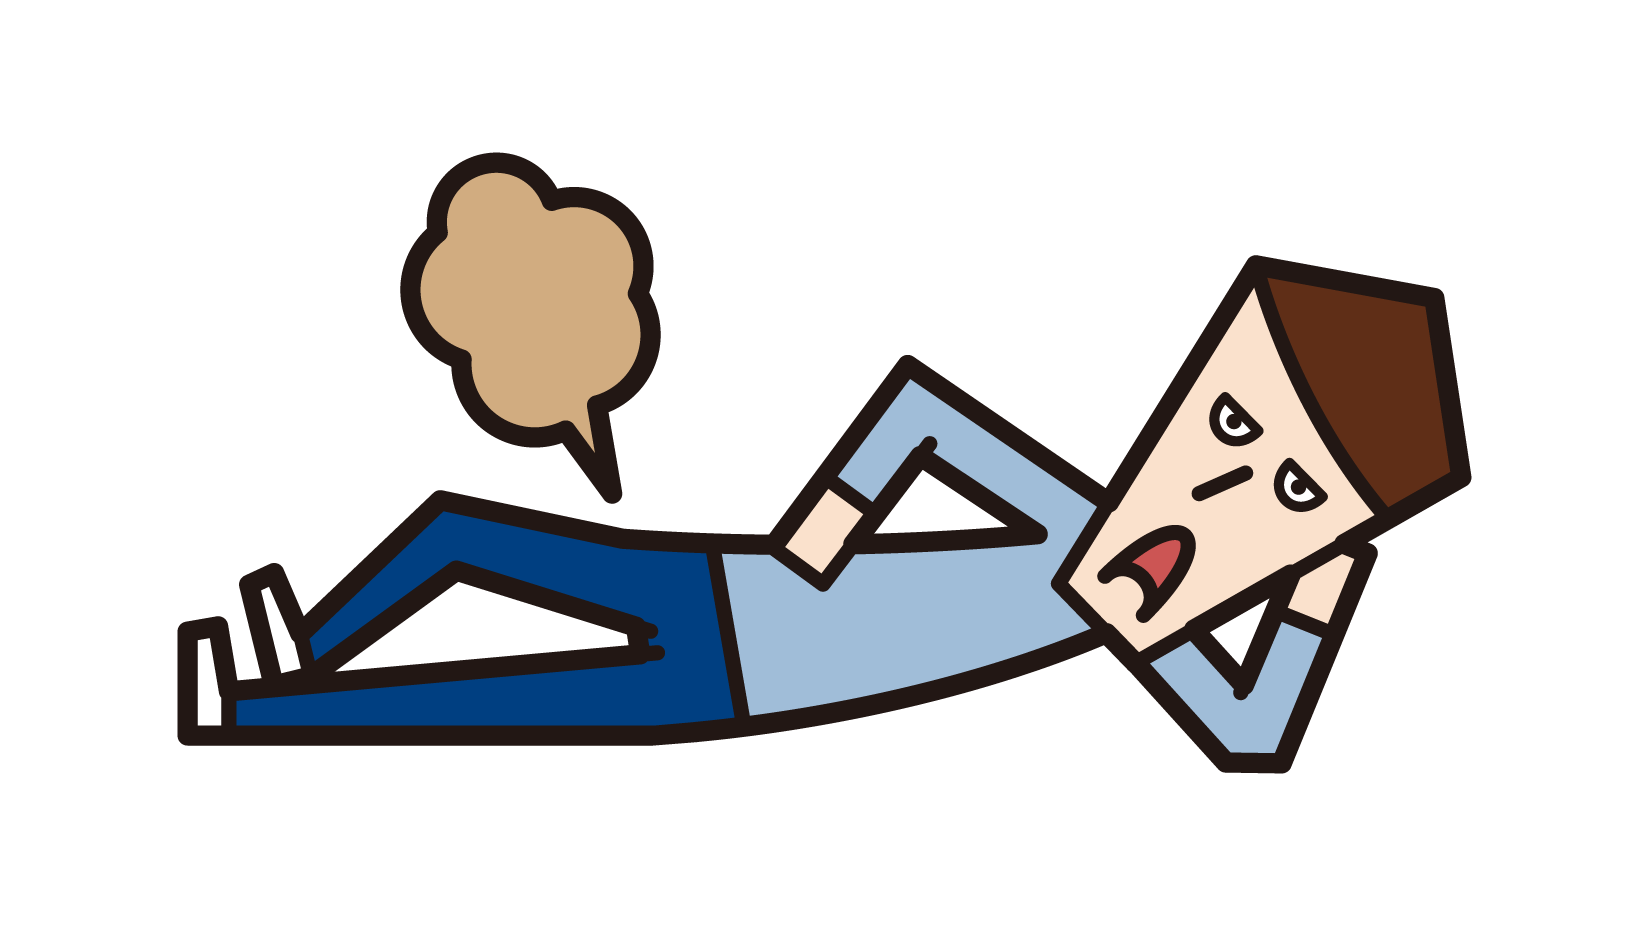 Illustration of a man (male) farting while sleeping